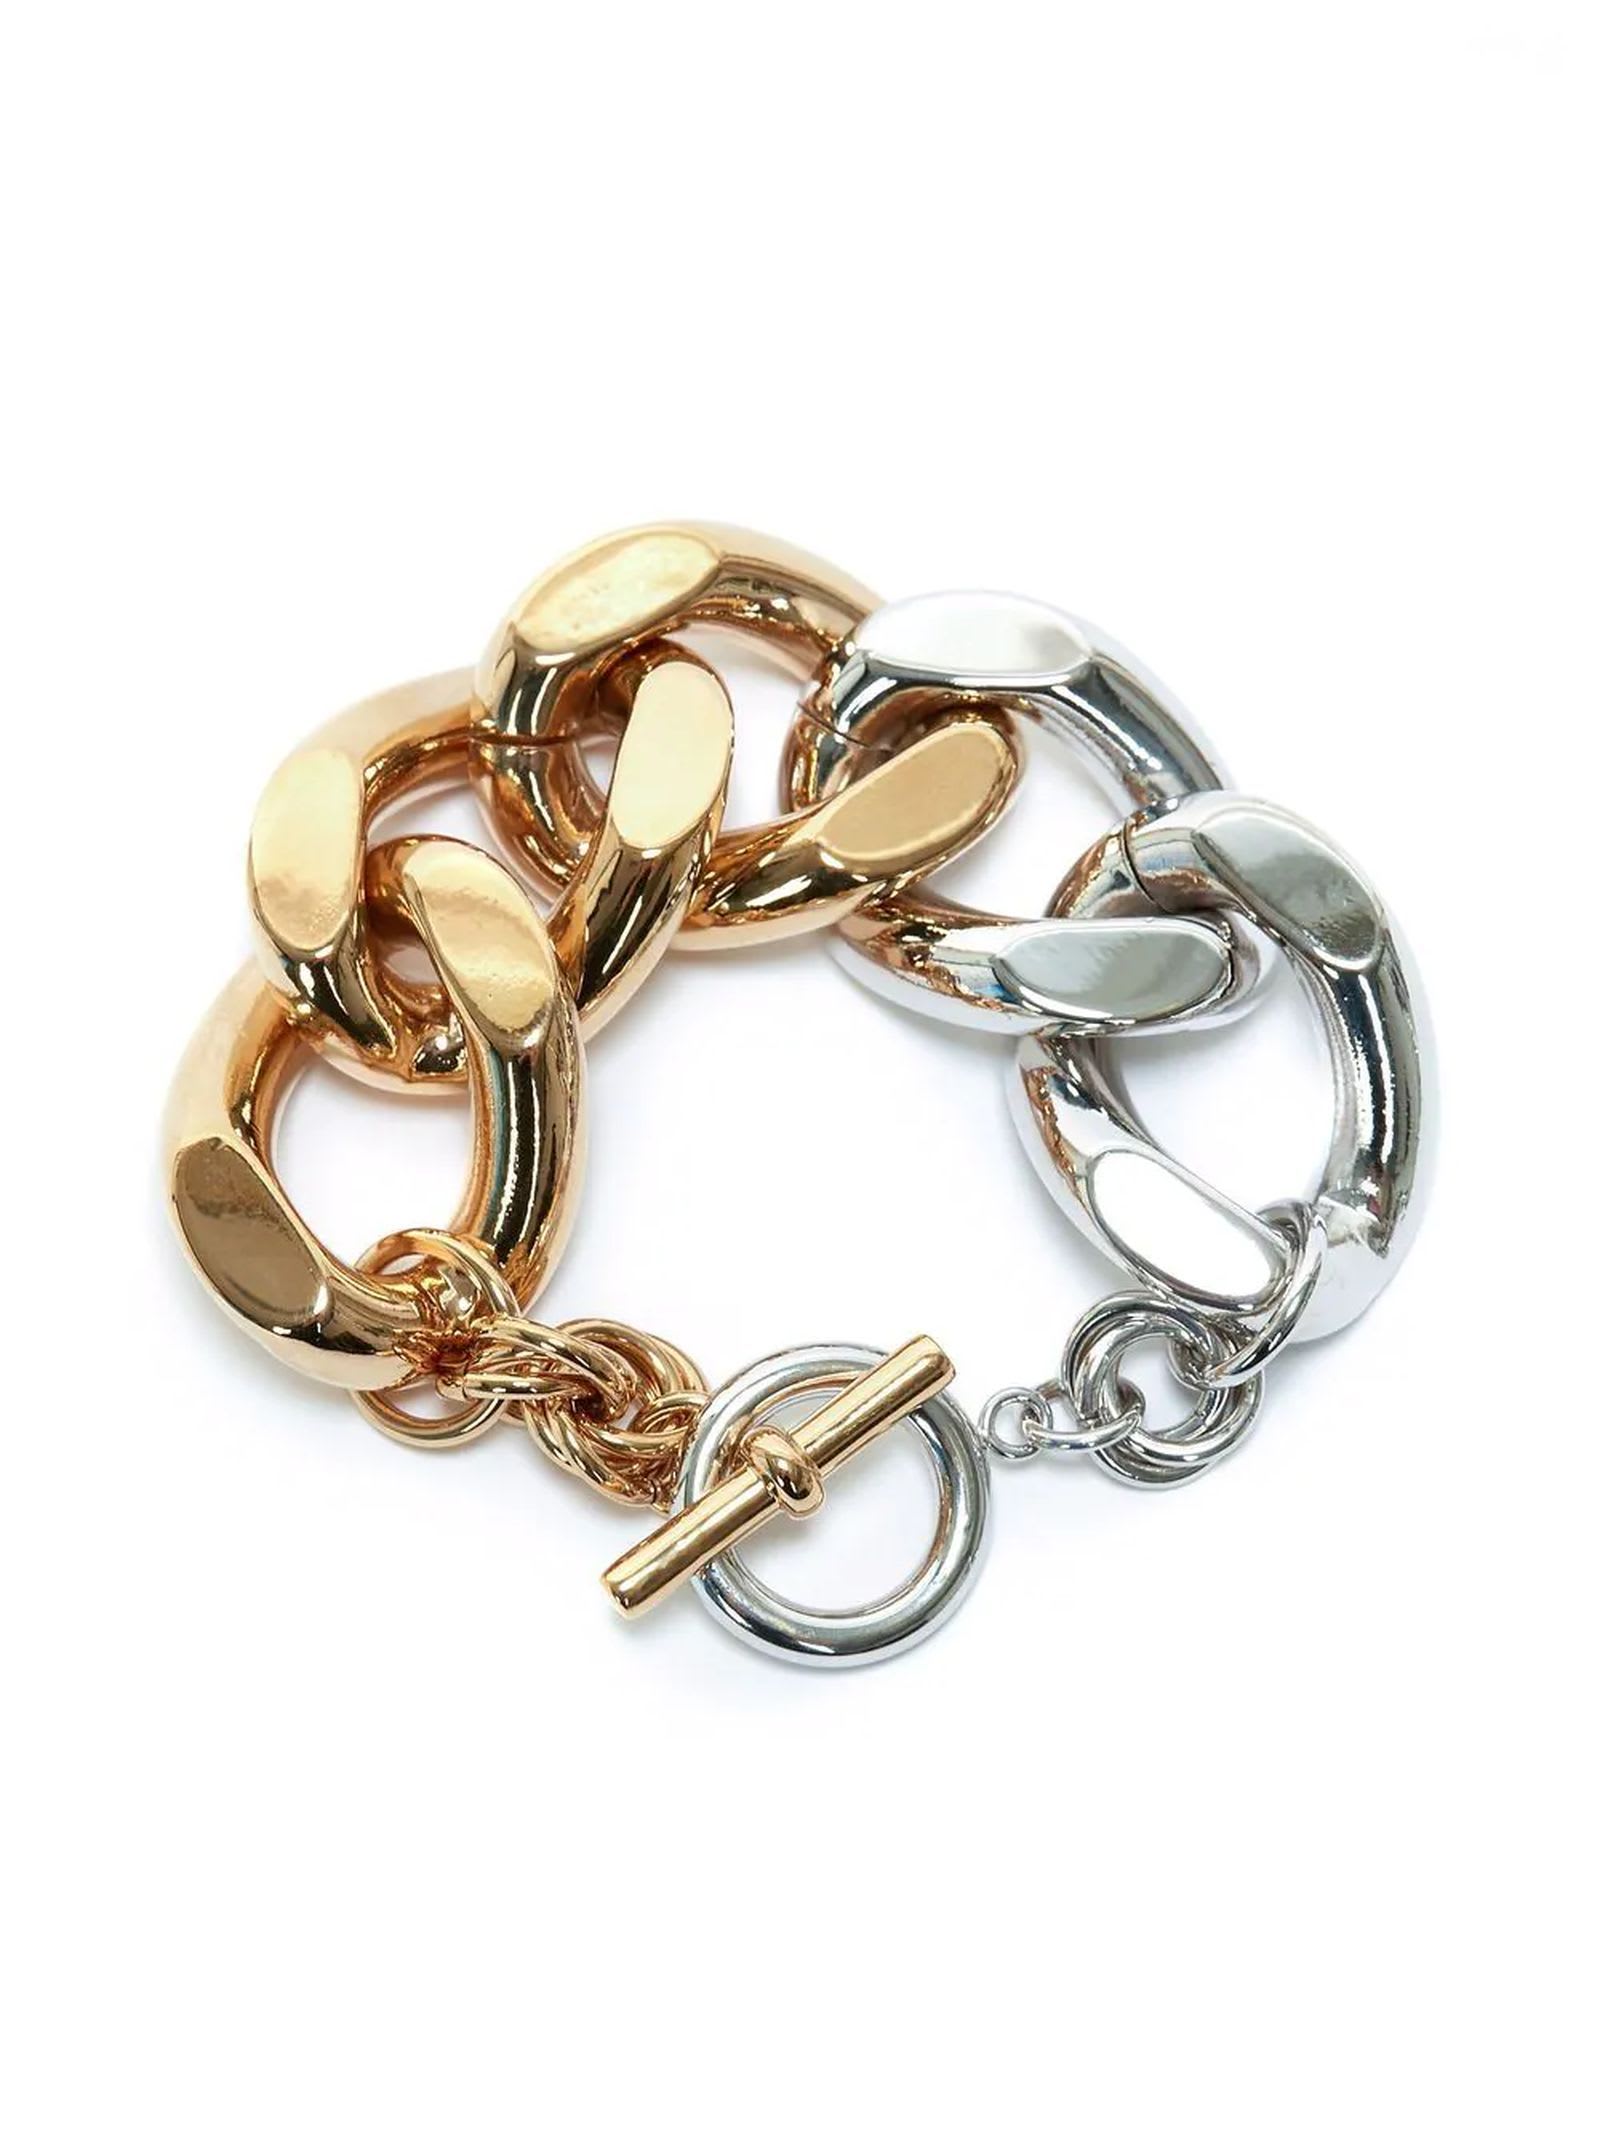 J.W. Anderson gold-tone and silver-tone chain bracelet